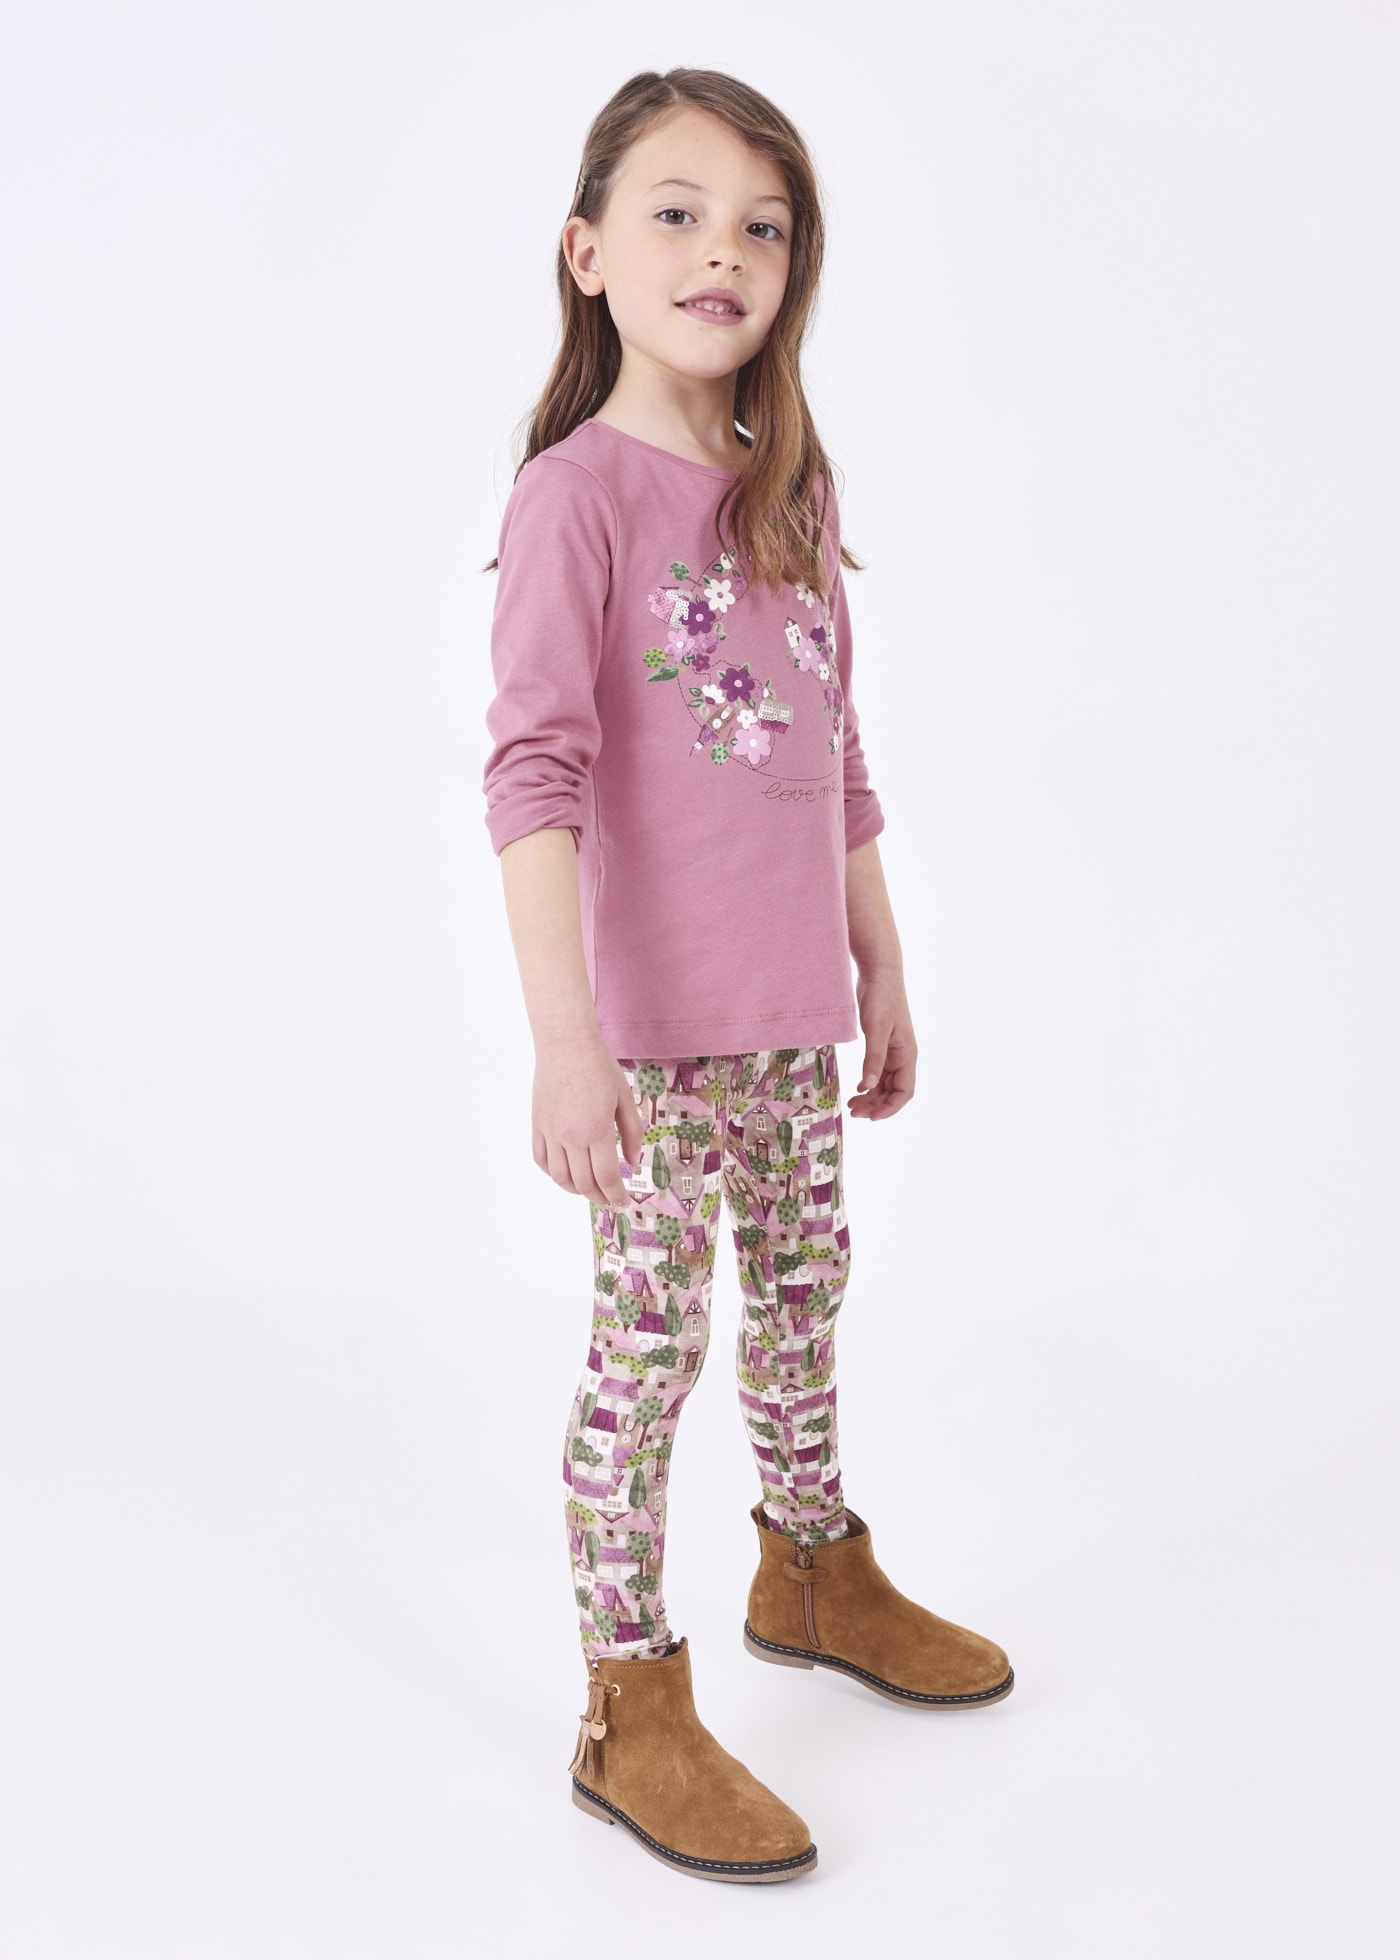 Mayoral ECOFRIENDS Patterned Leggings For Girl Malva, Child's Clothing